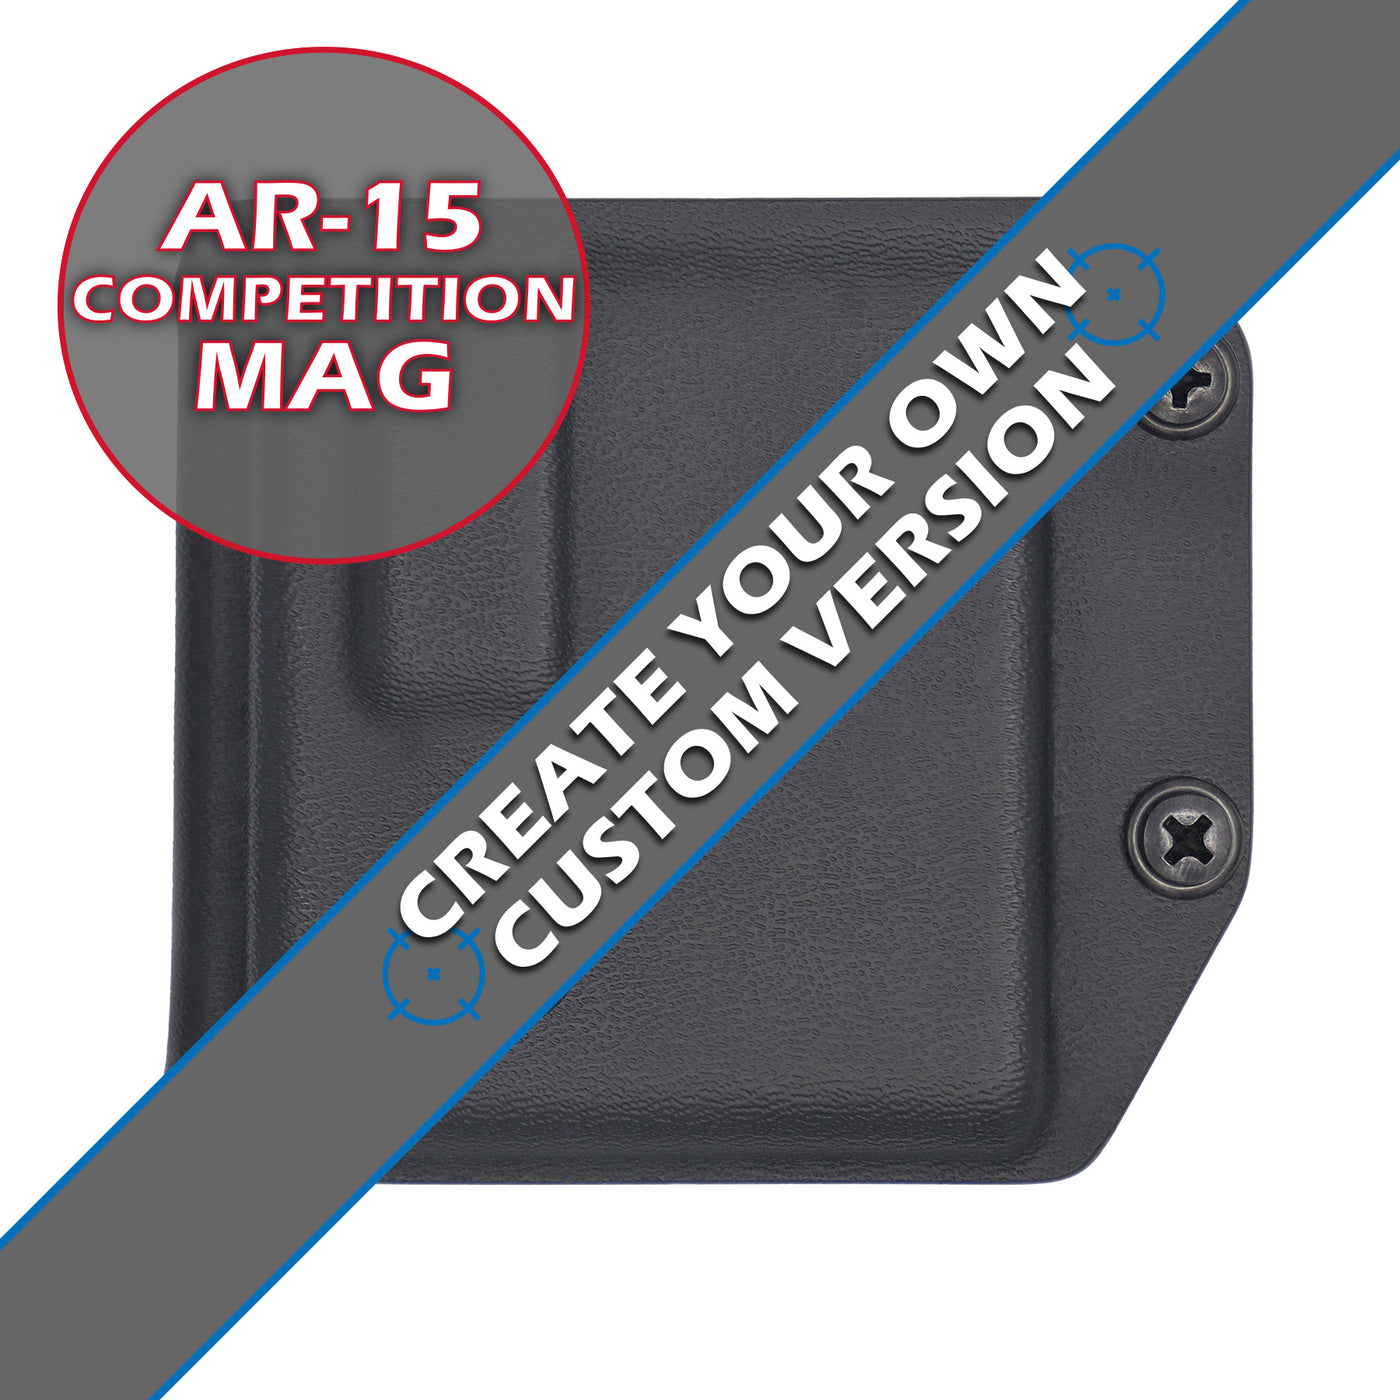 This is a custom C&G Holsters Competition Kydex AR-15 Mag Holster.